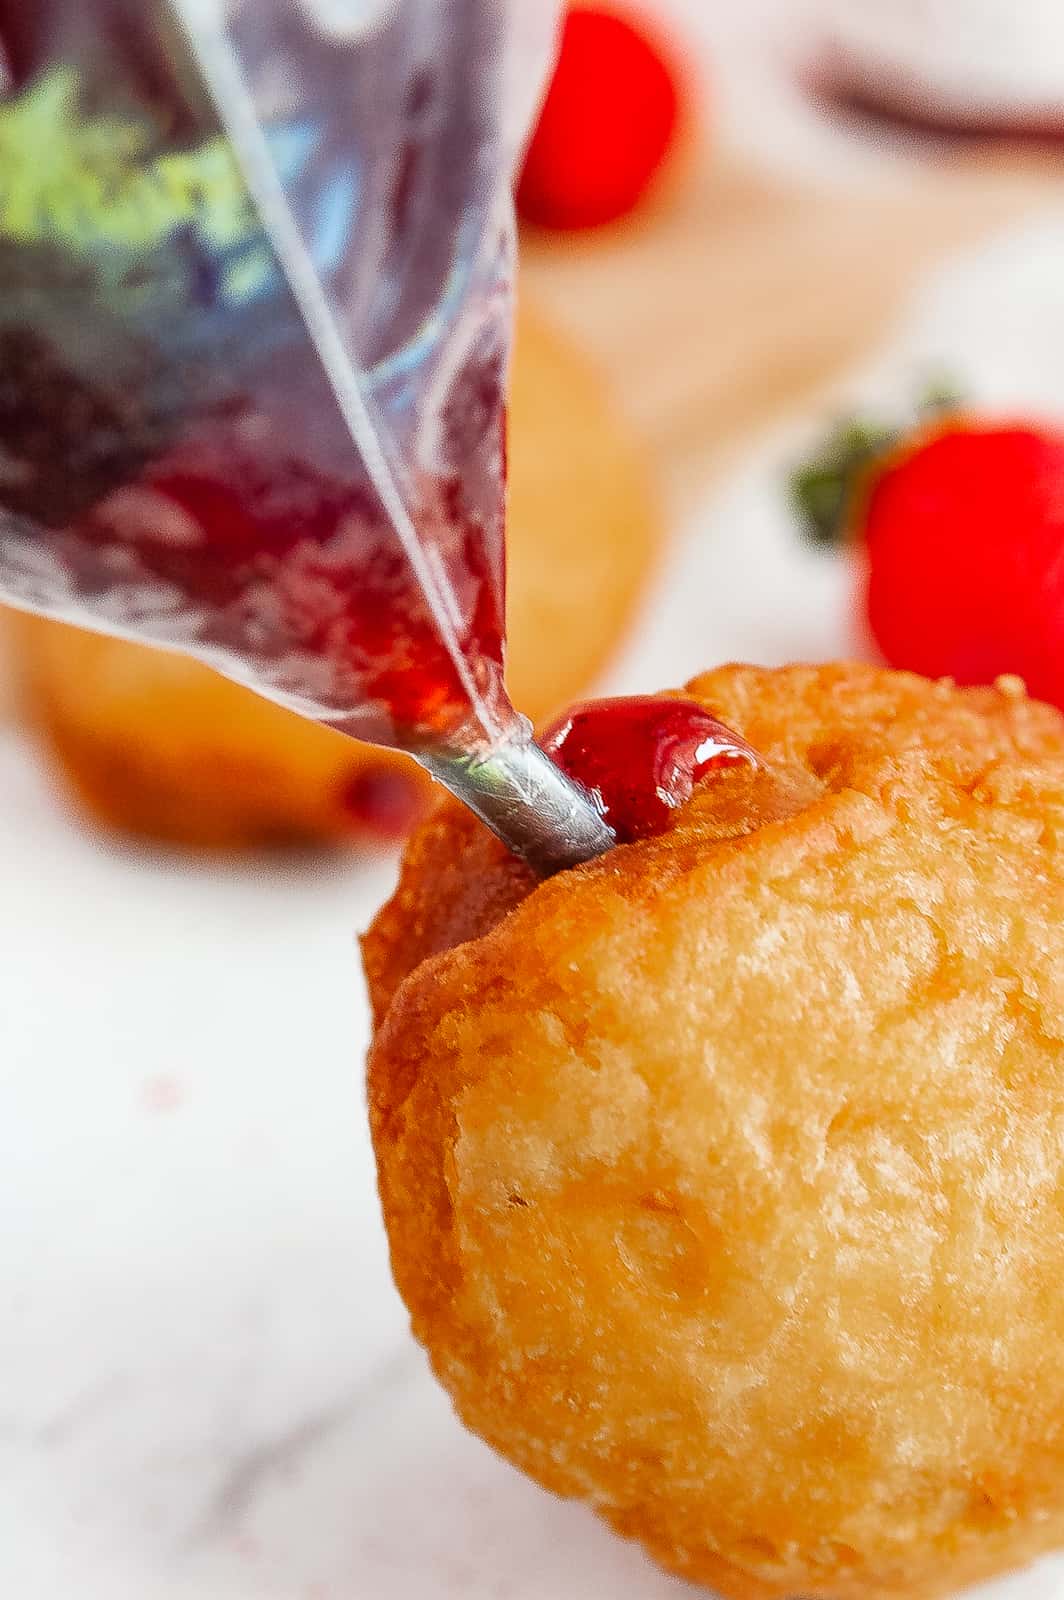 Piping bag filling donuts with jelly.